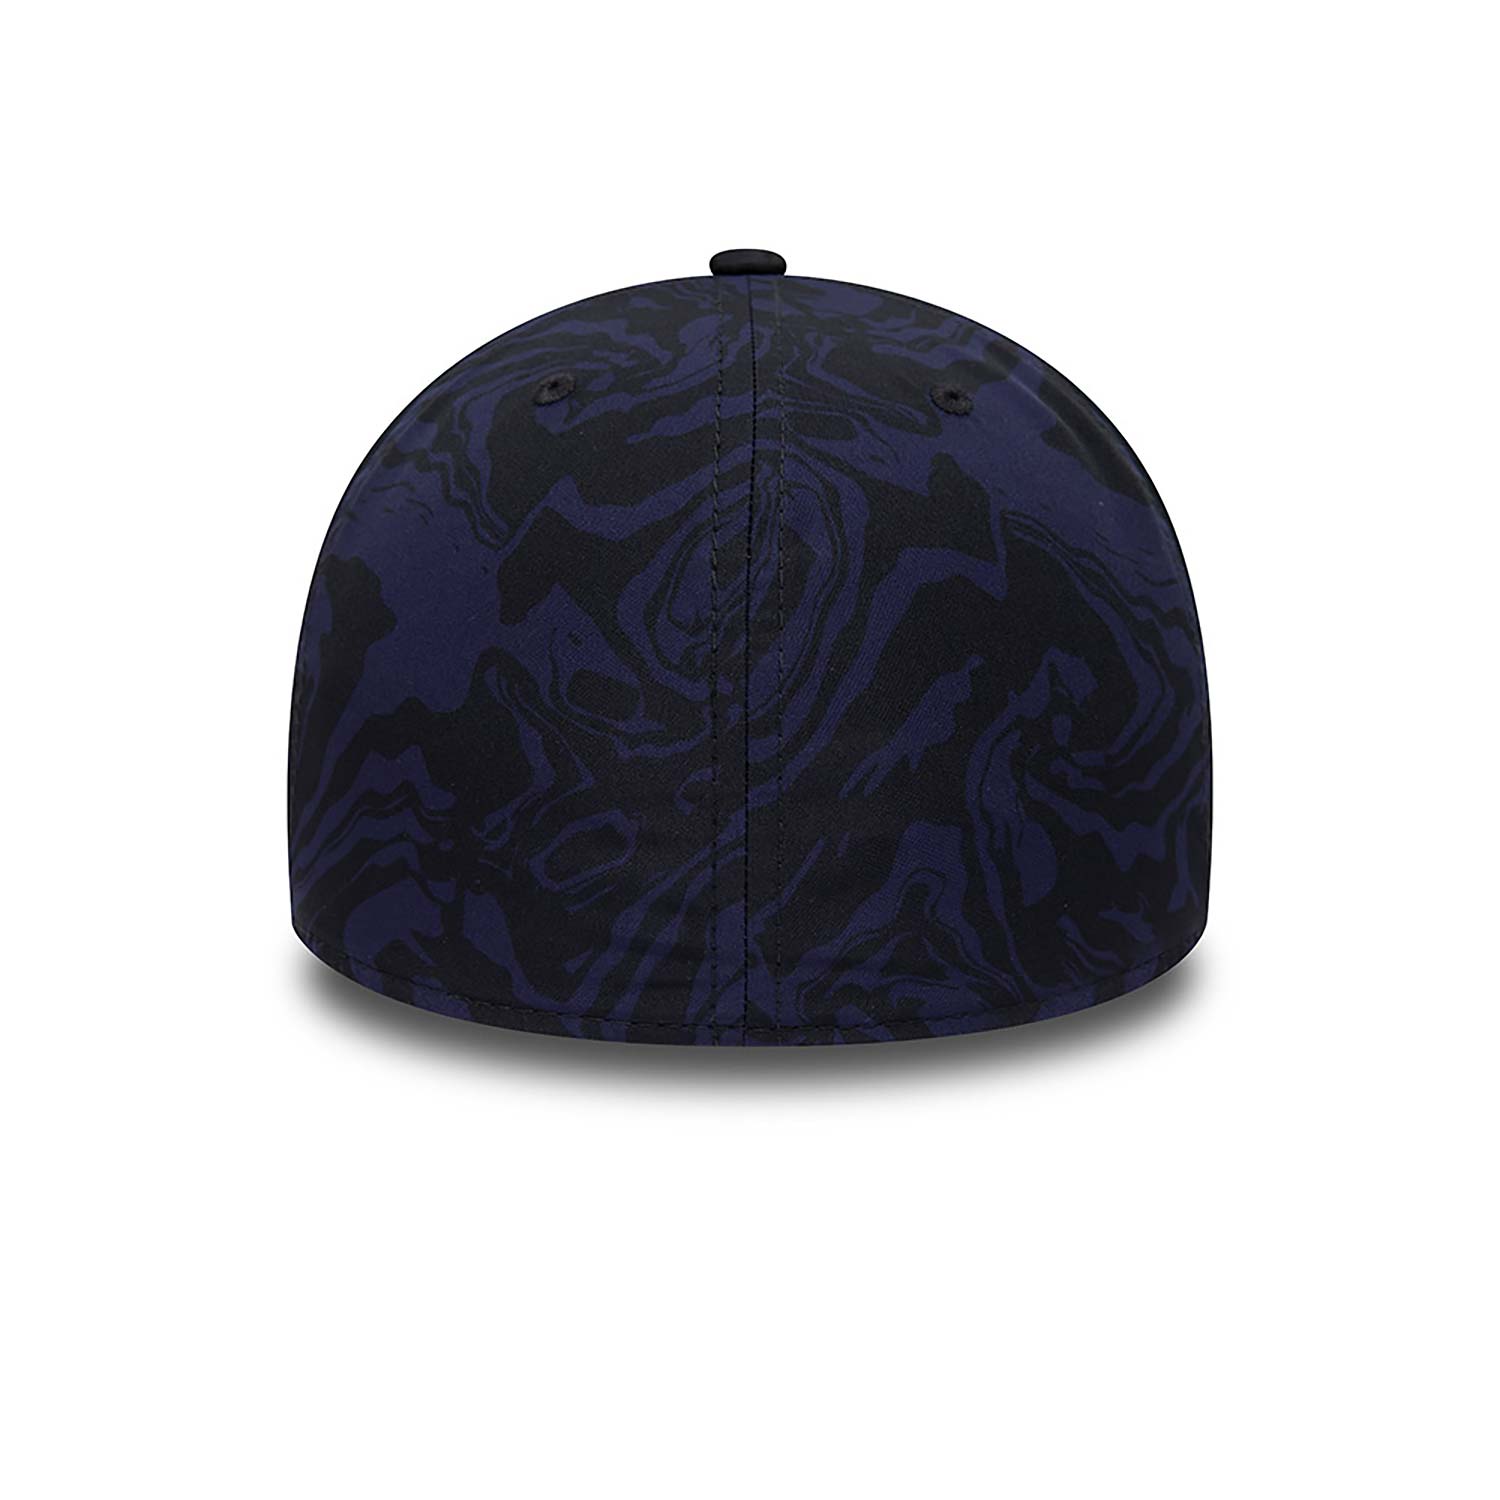 Cappellino 39THIRTY Stretch Fit England Rugby All Over Print Blu Navy